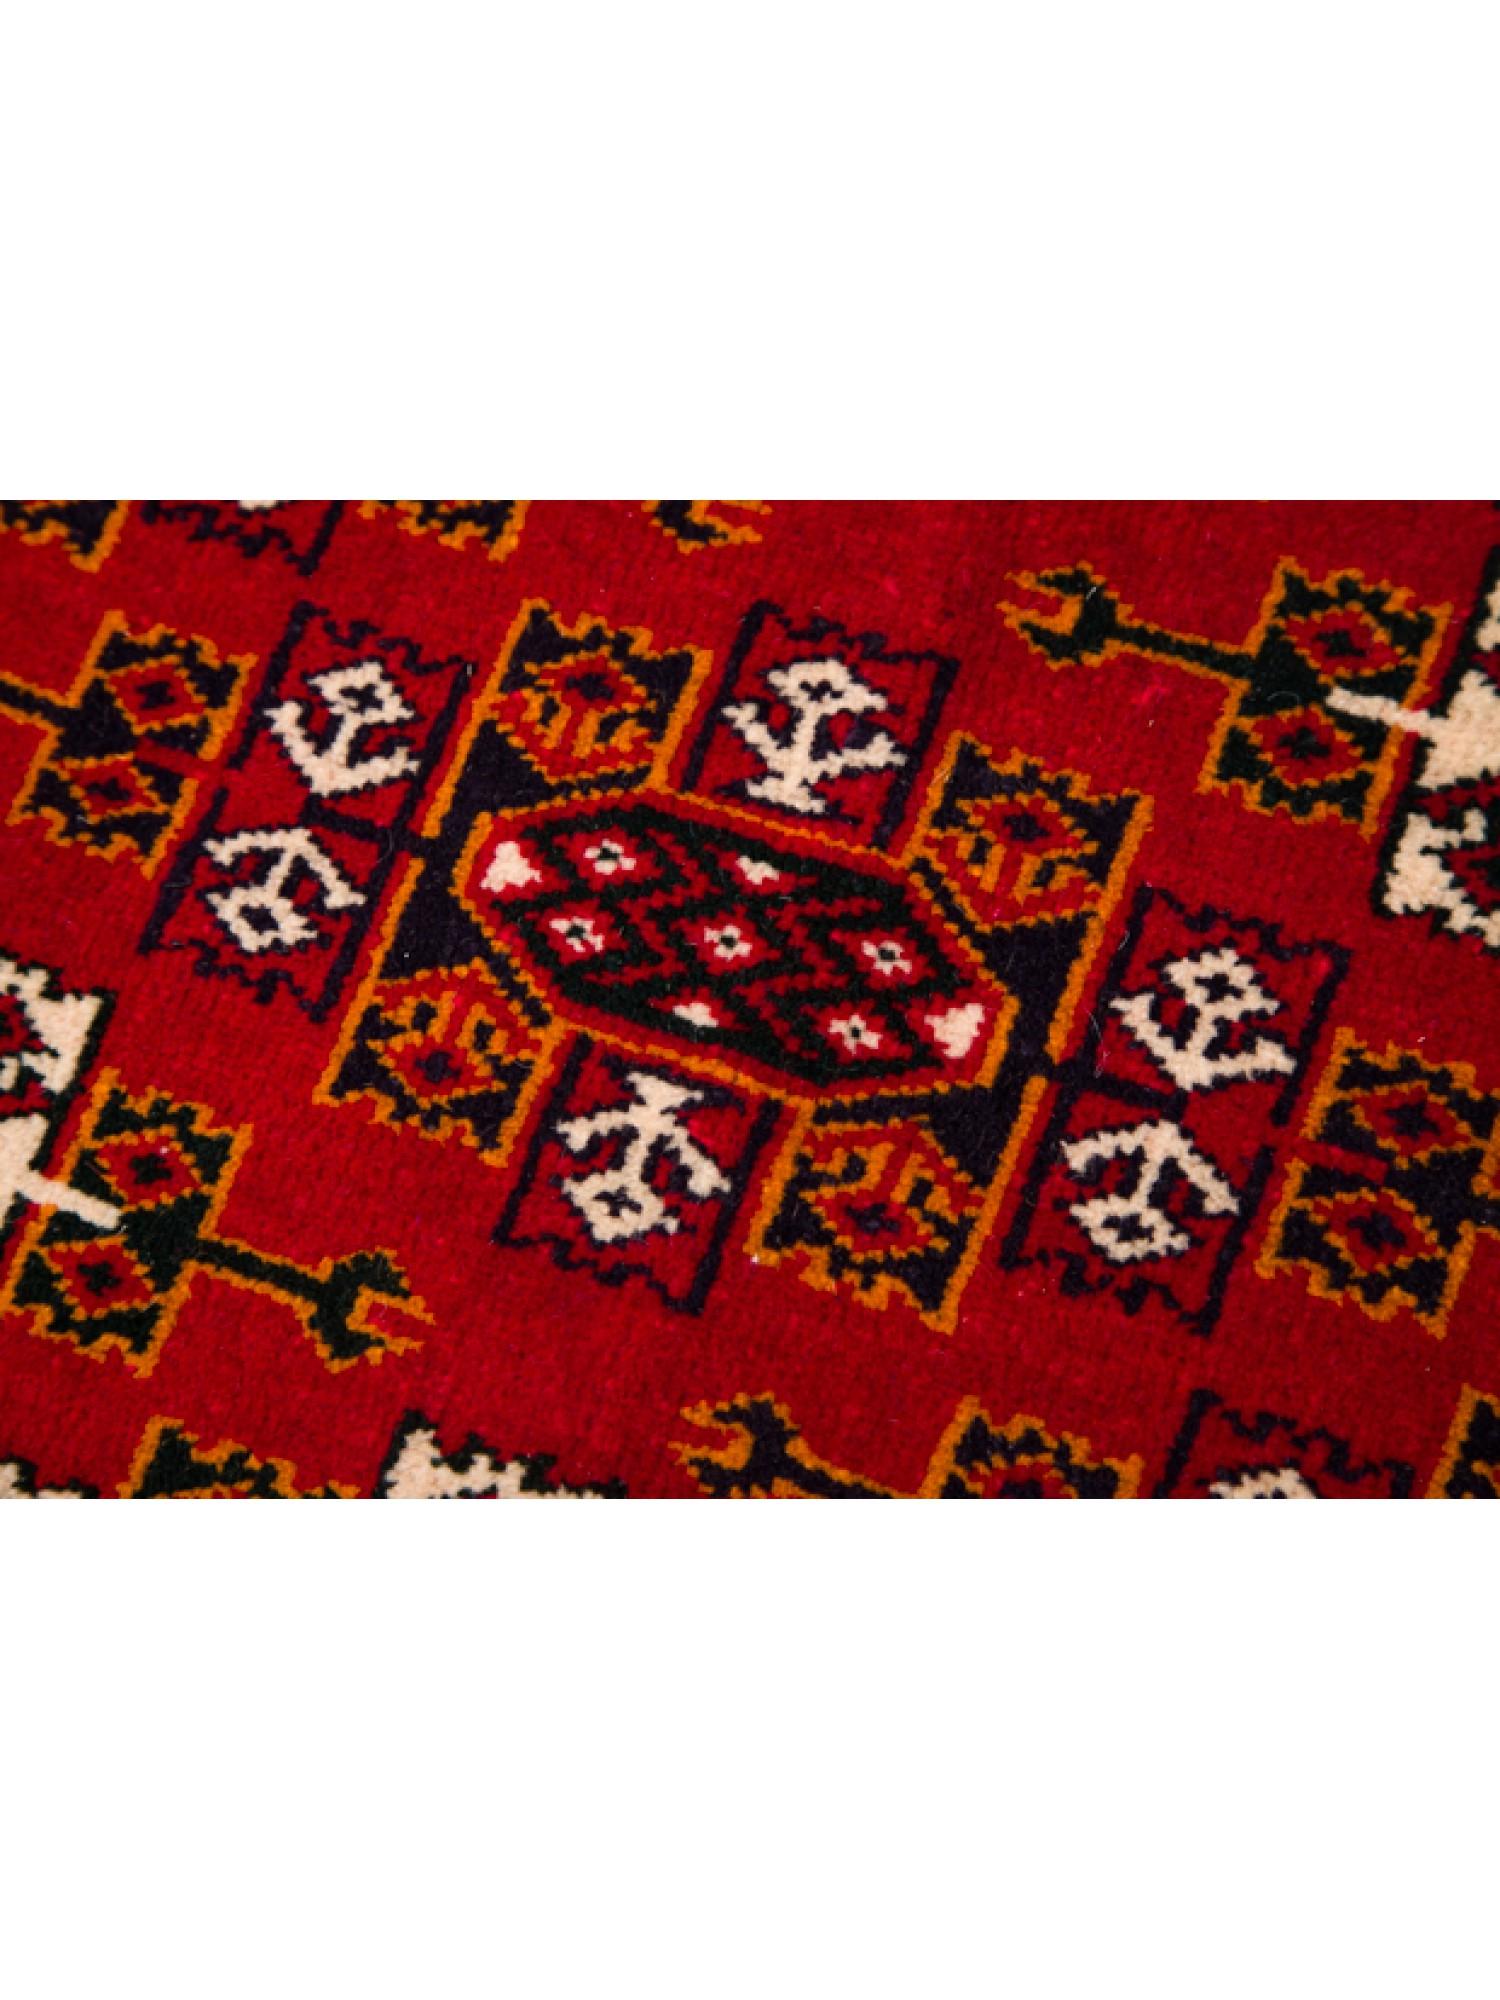 This is a Central Asian Old Tekke Bukhara Turkmen Runner Carpet from Turkmenistan with a rare and beautiful color composition.

Bukhara carpet (Turkmen Rug, Bokhara, Buhara, Bukhara) is the name of a tribal rug woven by the Turkmen people. It came